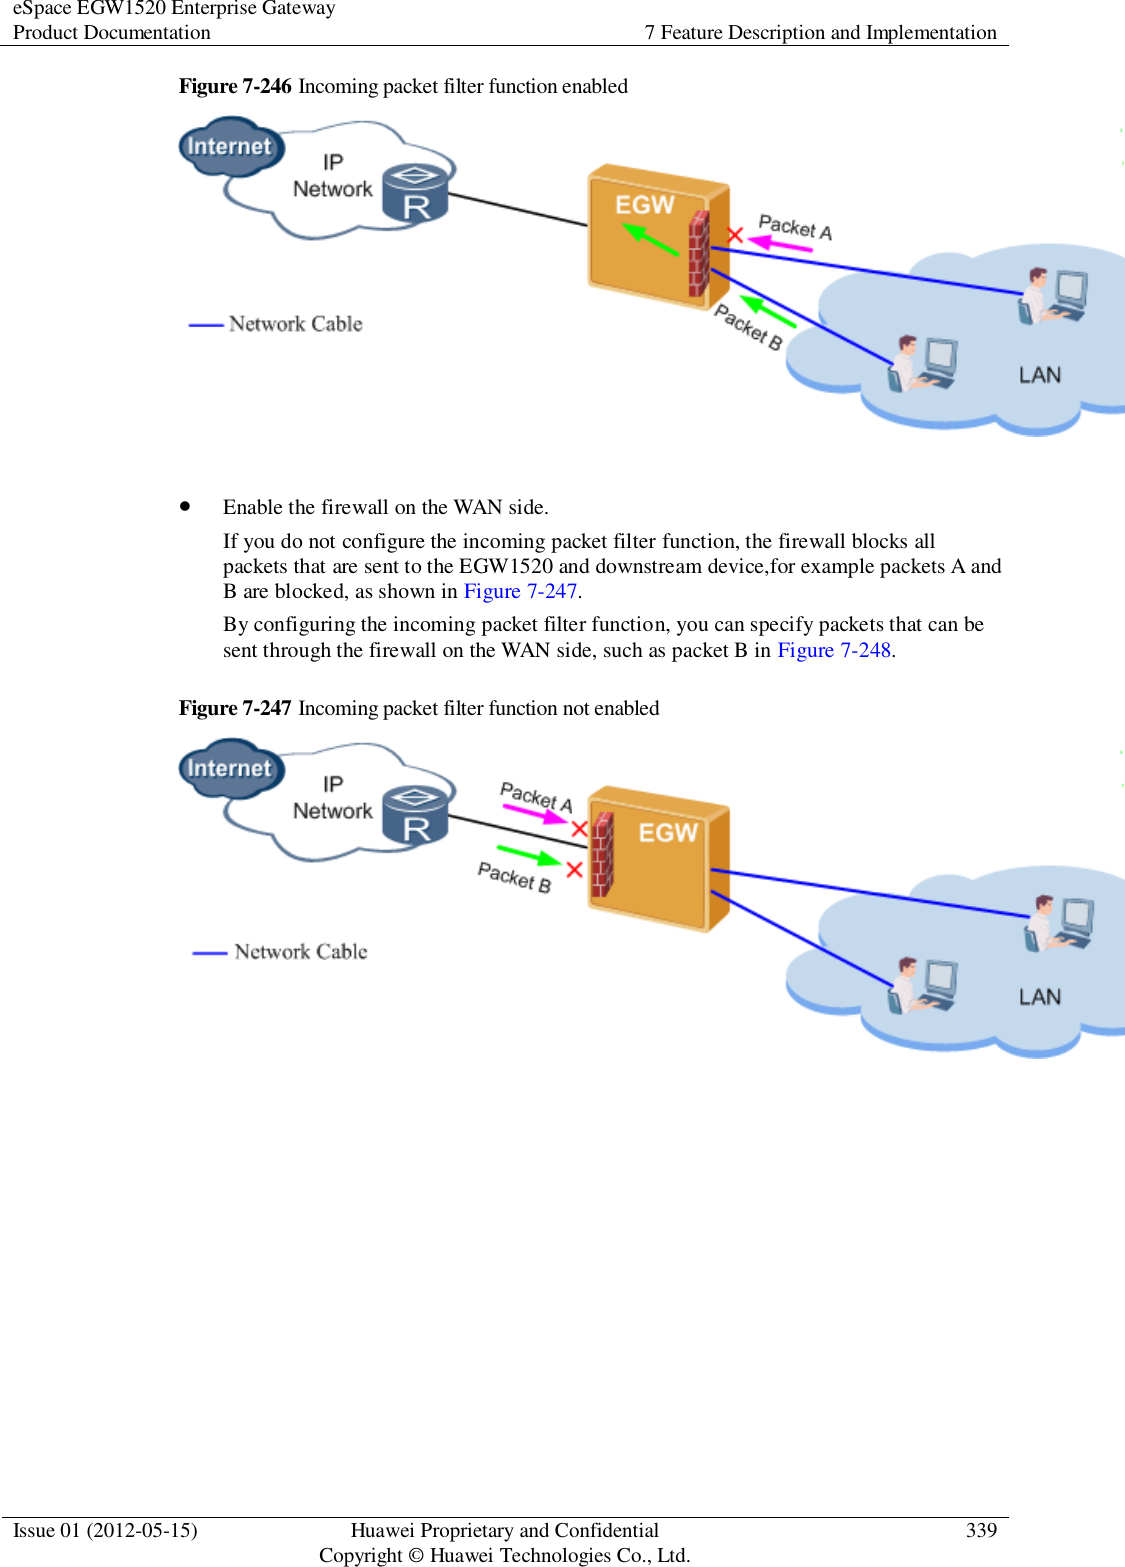 eSpace EGW1520 Enterprise Gateway Product Documentation 7 Feature Description and Implementation  Issue 01 (2012-05-15) Huawei Proprietary and Confidential                                     Copyright © Huawei Technologies Co., Ltd. 339  Figure 7-246 Incoming packet filter function enabled    Enable the firewall on the WAN side. If you do not configure the incoming packet filter function, the firewall blocks all packets that are sent to the EGW1520 and downstream device,for example packets A and B are blocked, as shown in Figure 7-247. By configuring the incoming packet filter function, you can specify packets that can be sent through the firewall on the WAN side, such as packet B in Figure 7-248. Figure 7-247 Incoming packet filter function not enabled   